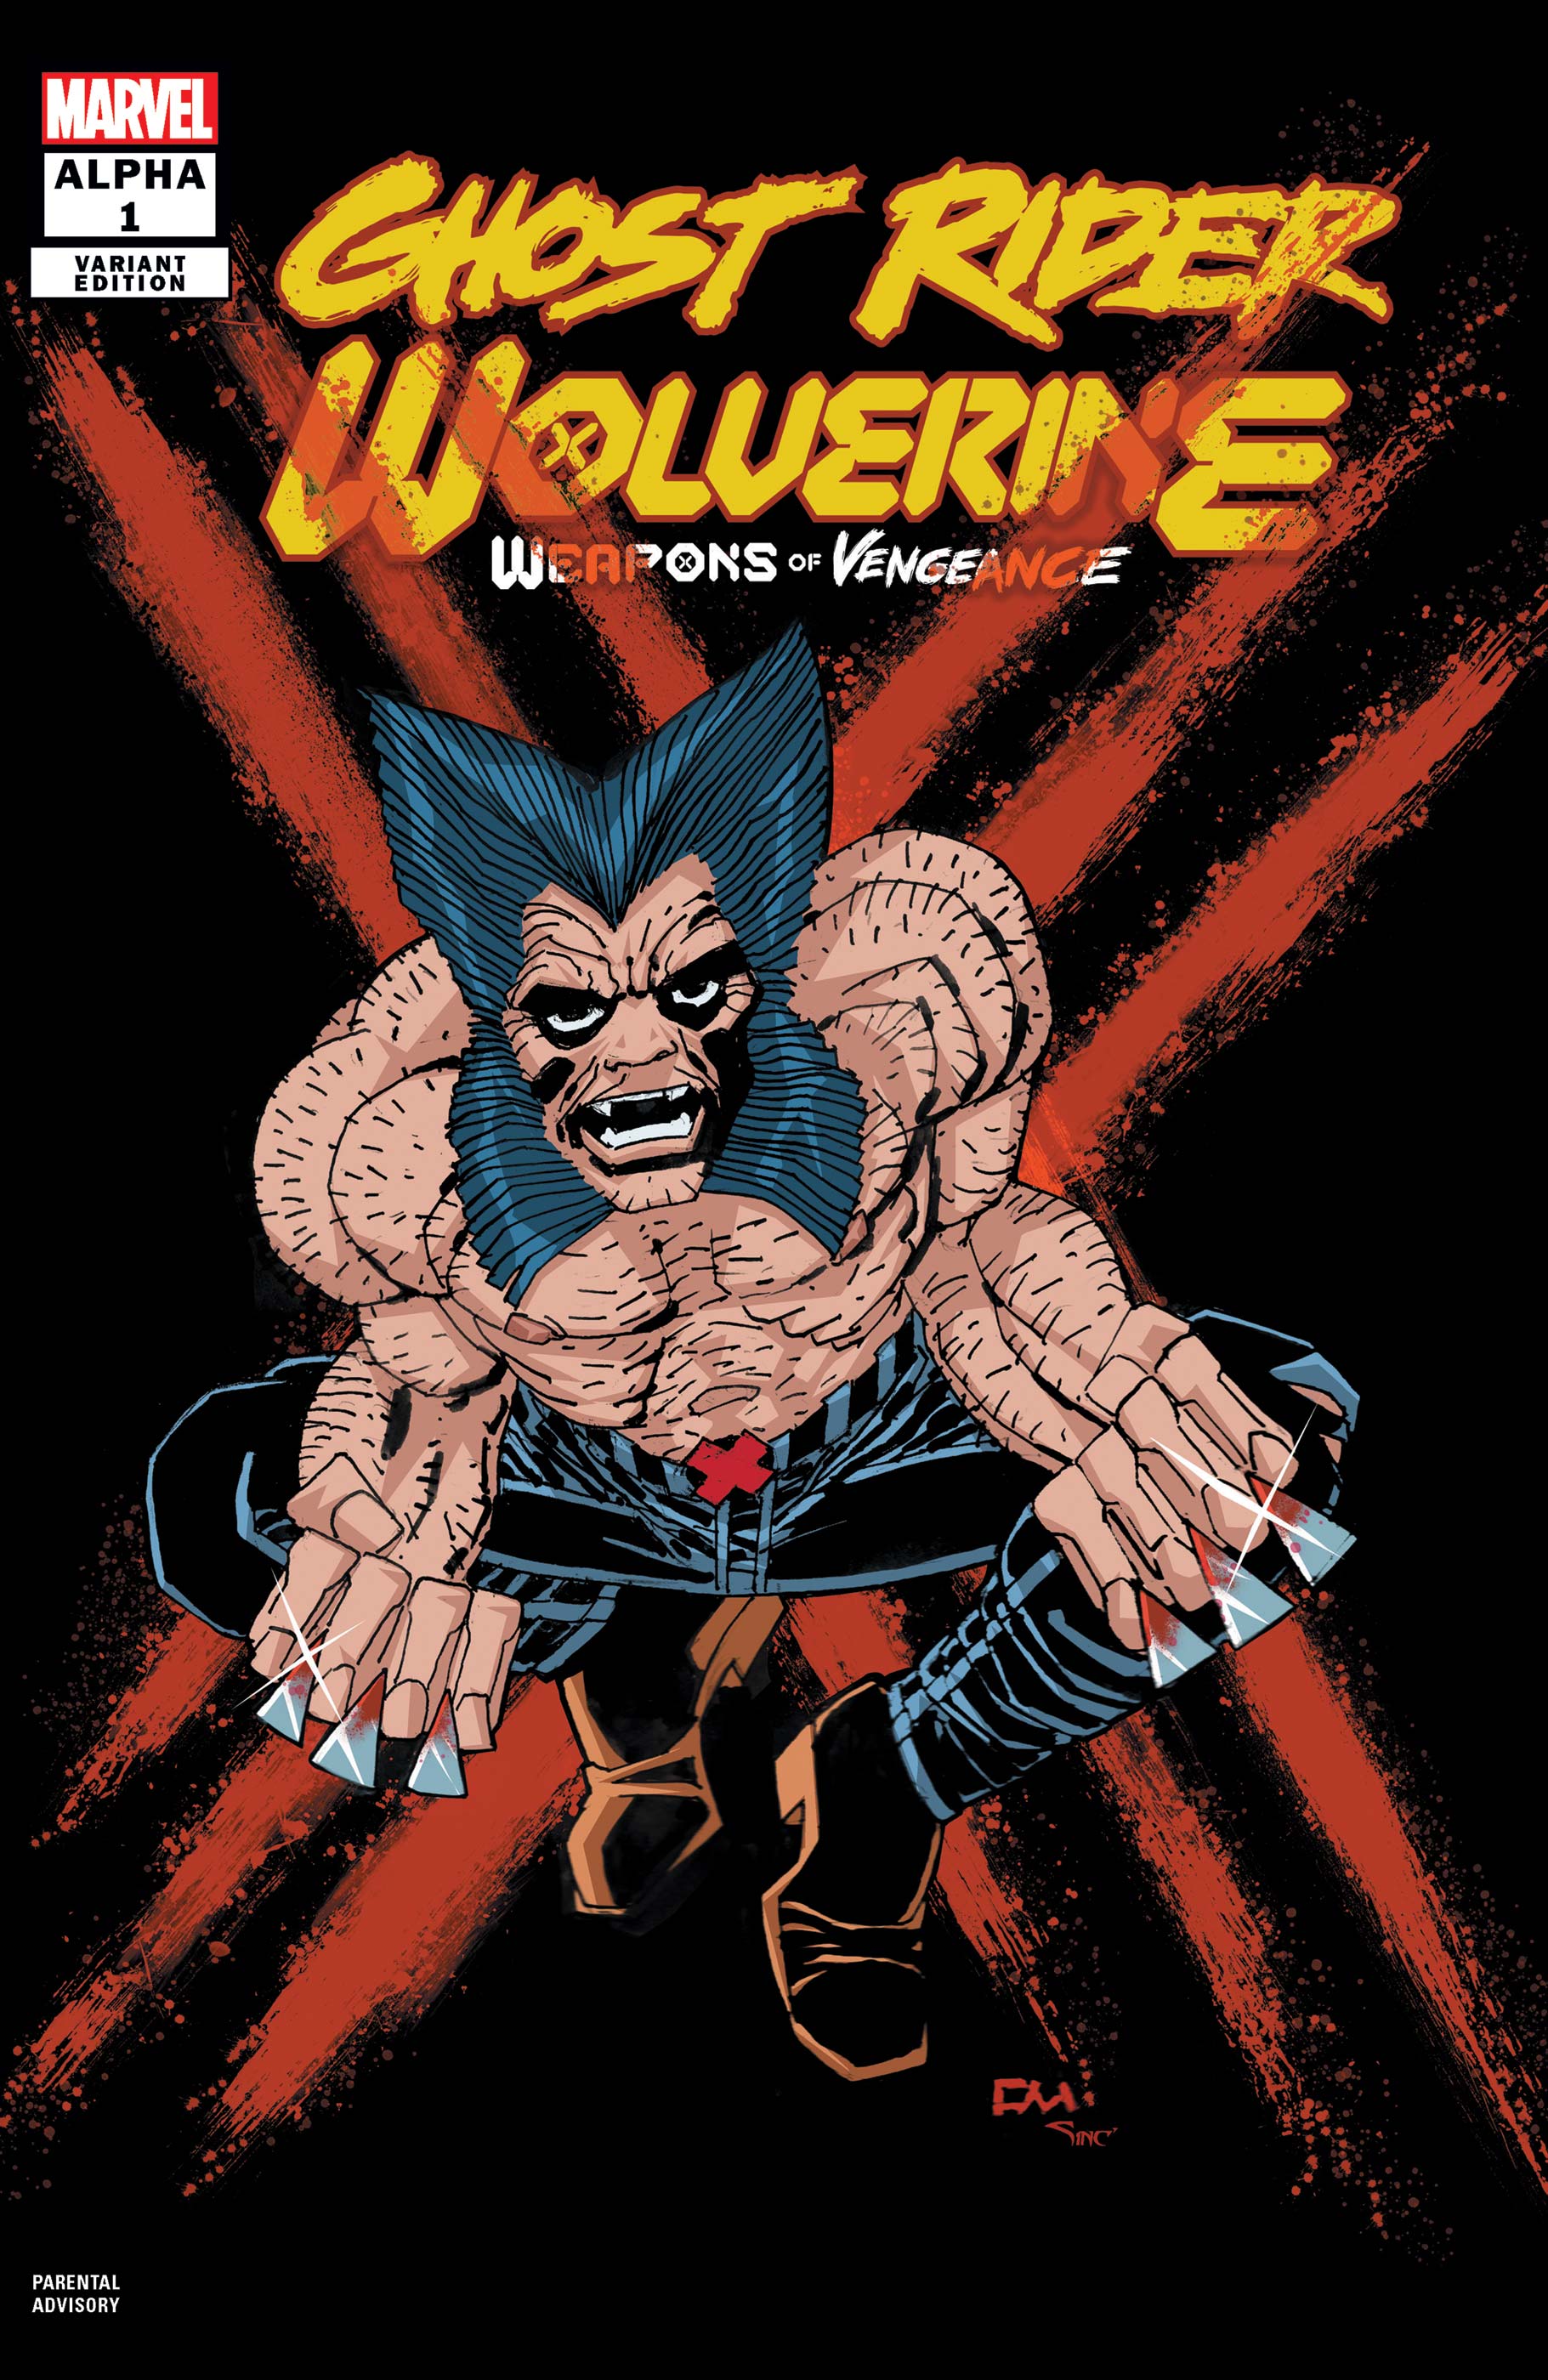 Wolverine Marvel Comics Poster by Mark Texeira